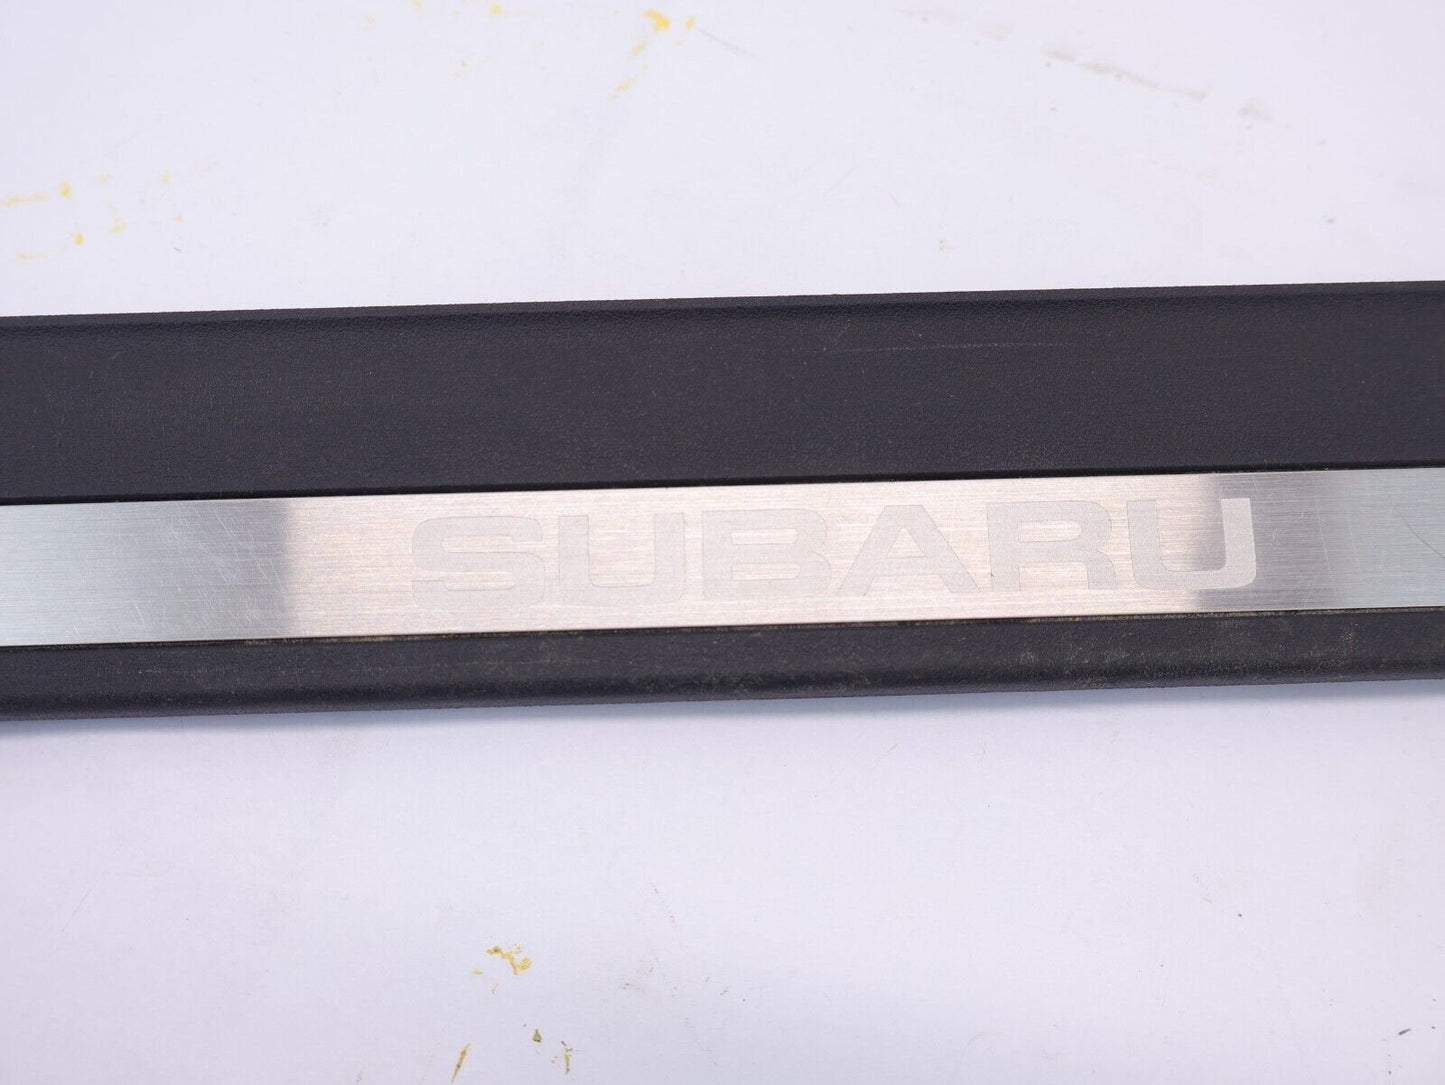 2012 Subaru Outback Front Door Sill Trim Scuff Driver LH Left OEM 2013-2014